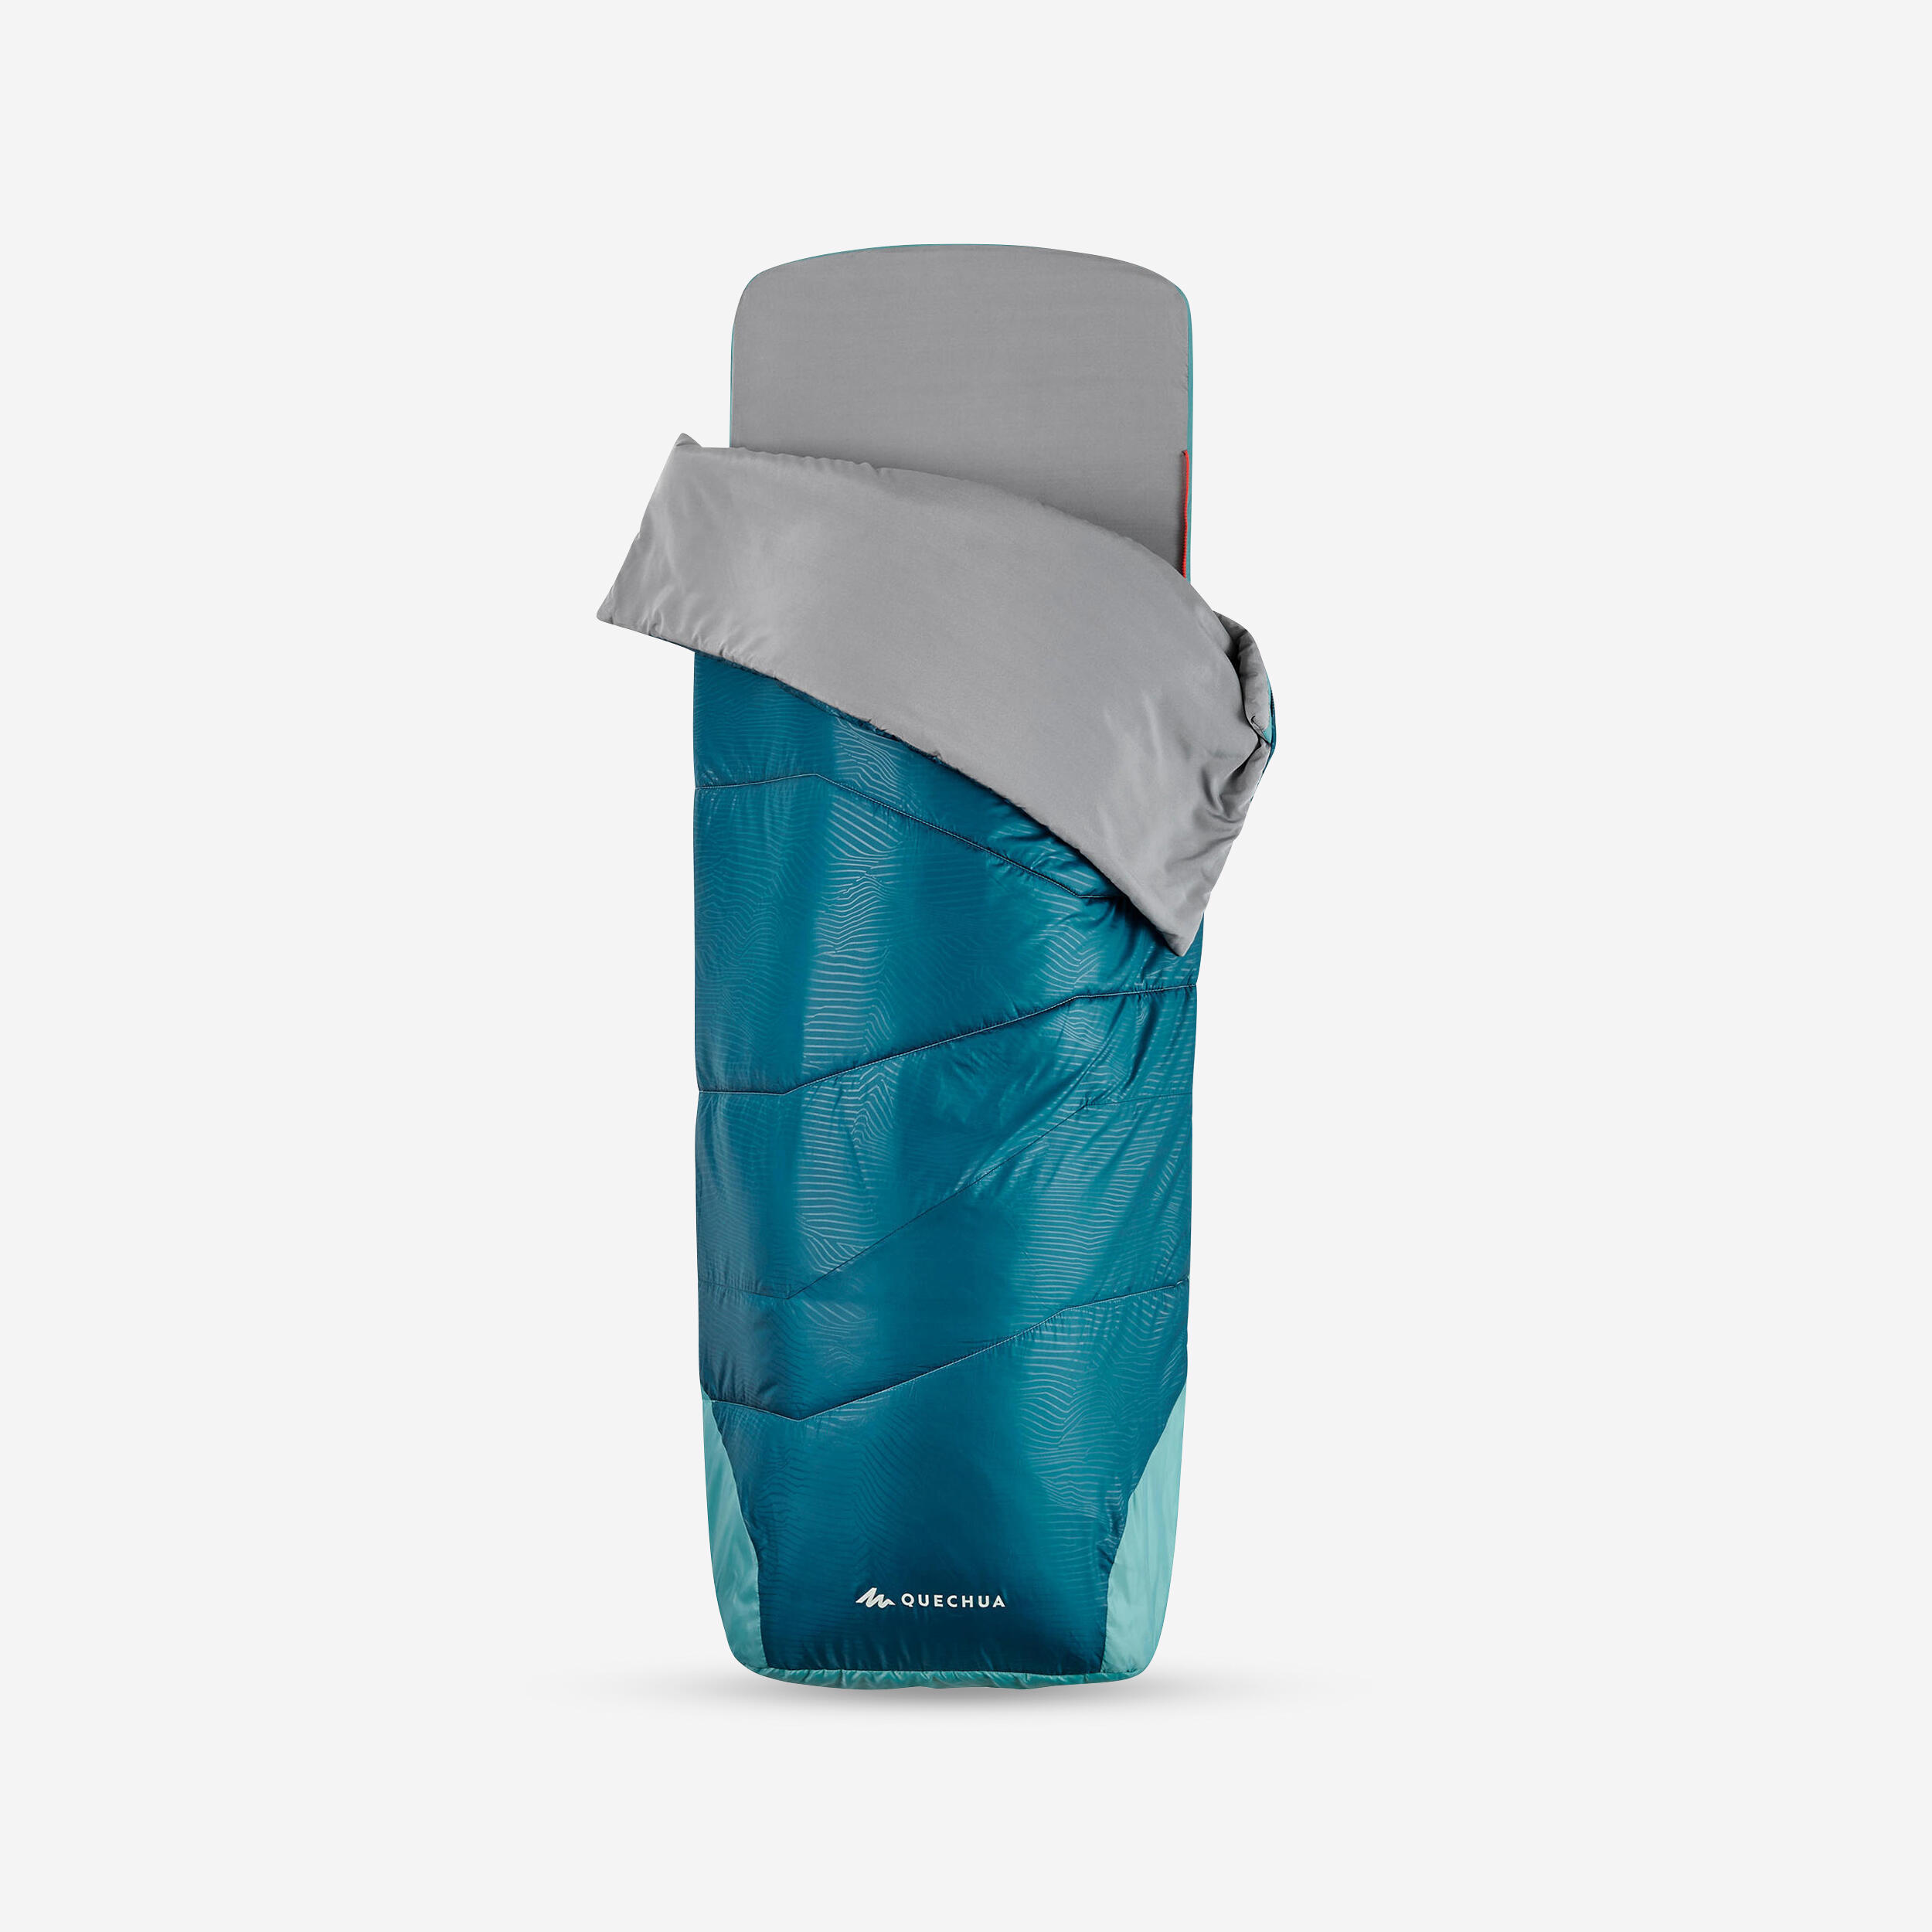 QUECHUA REPLACEMENT SLEEPING BAG FOR SLEEPIN BED MH500 15°C L